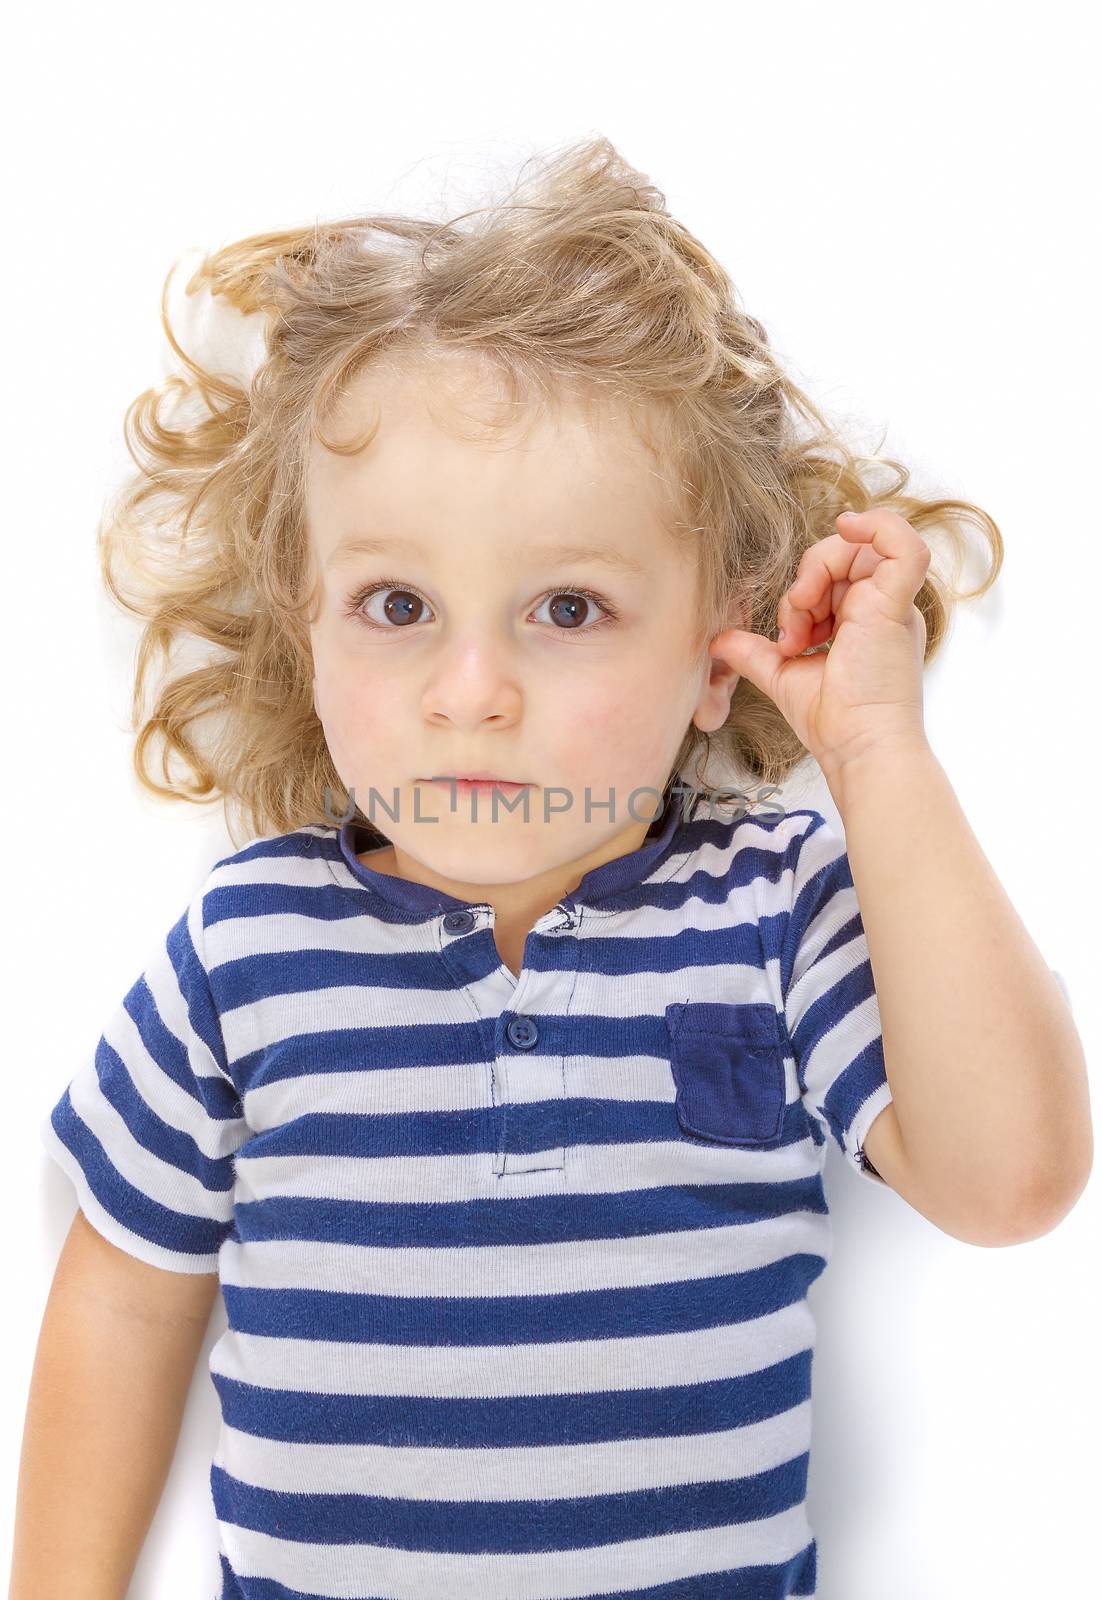 Little boy on white background by manaemedia